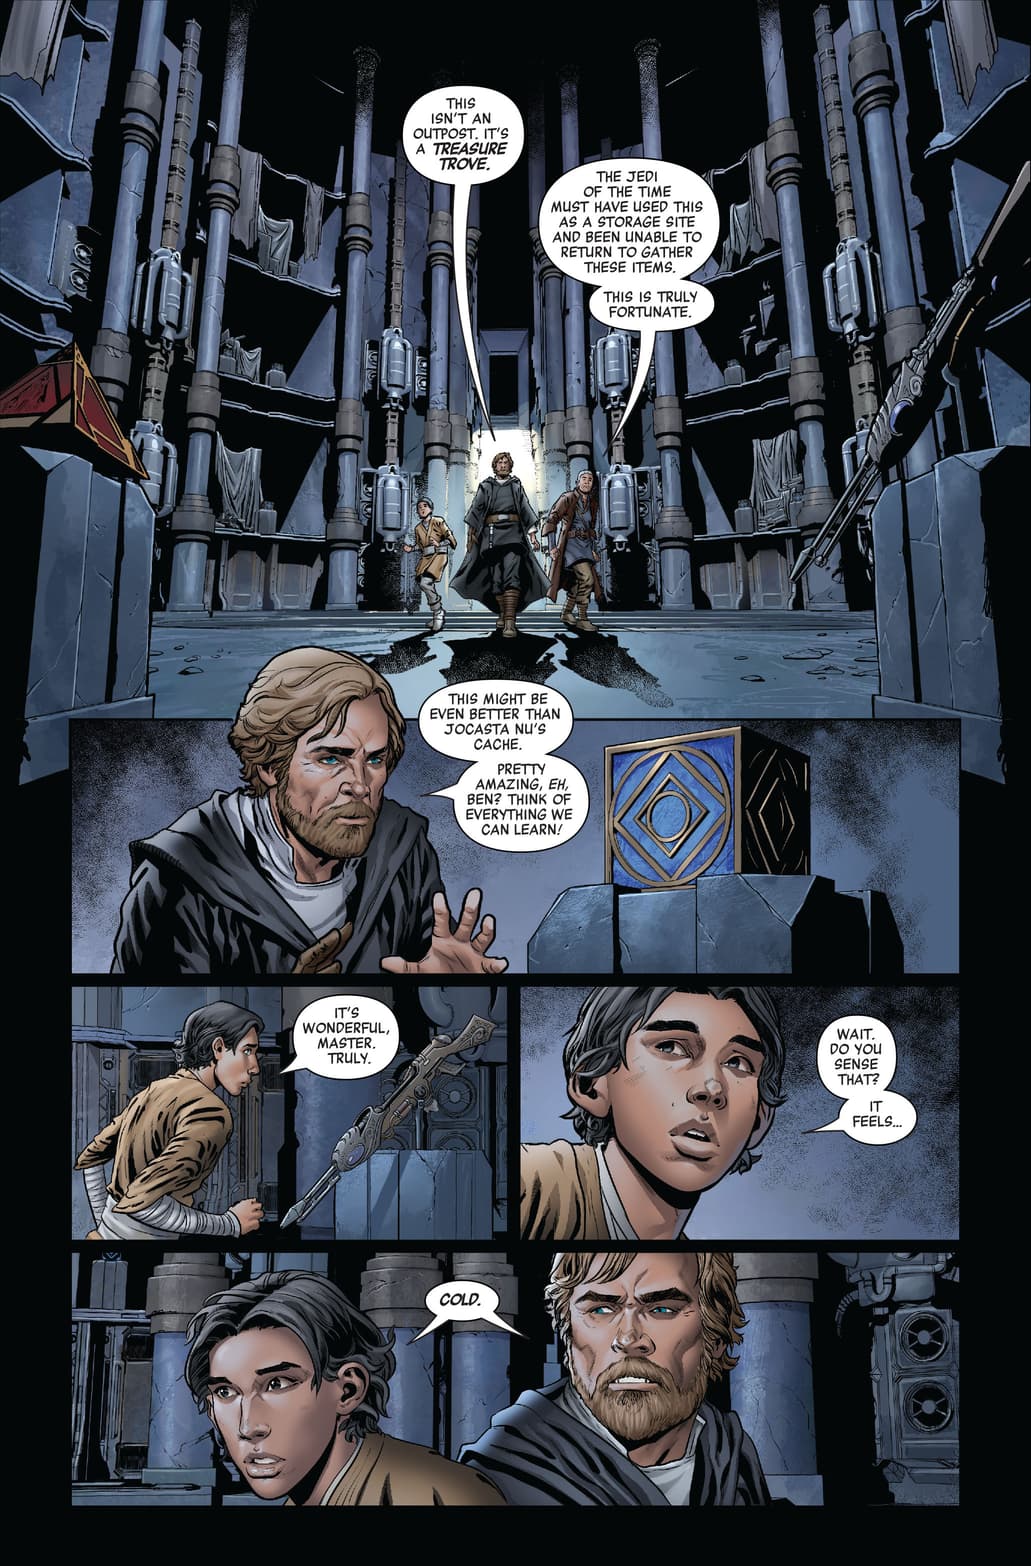 STAR WARS: THE RISE OF KYLO REN #2 art by Will Sliney with colors by Guru-eFX